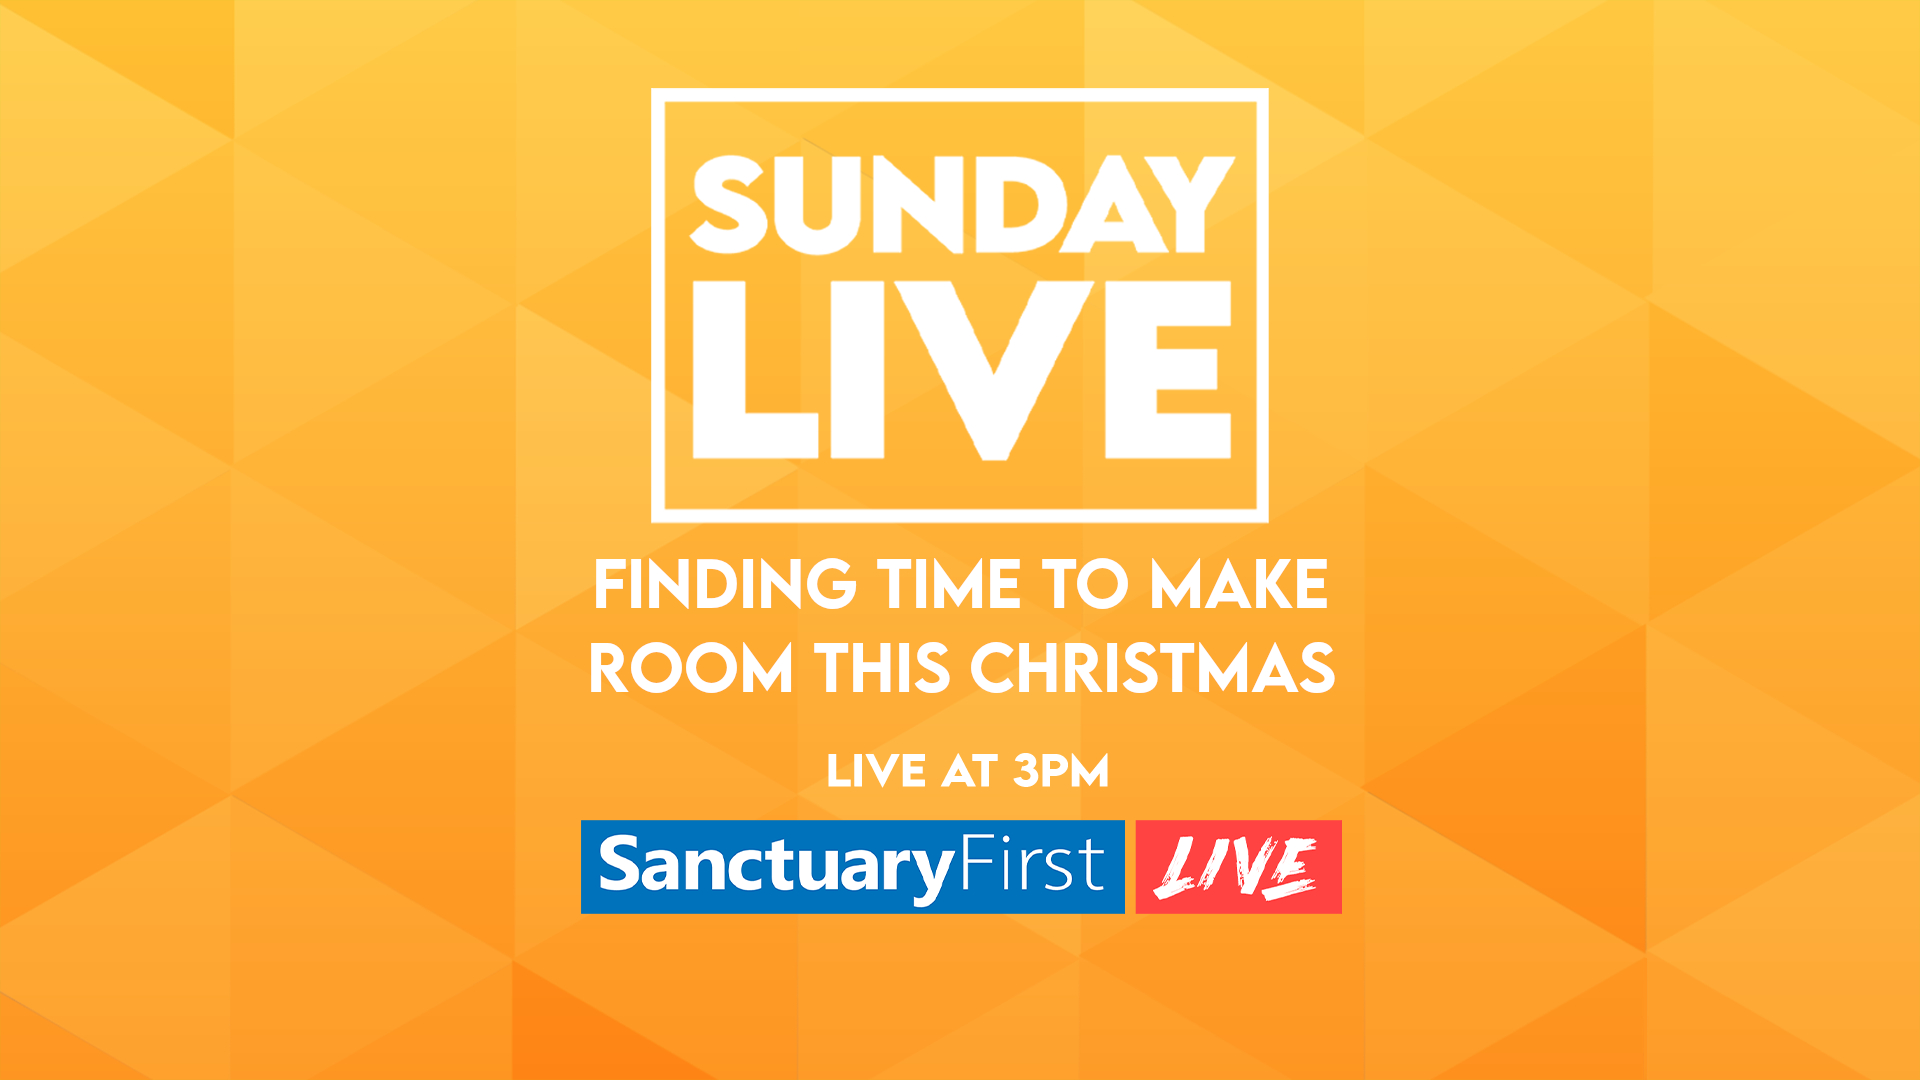 Sunday Live - Finding Time To Make Room This Christmas